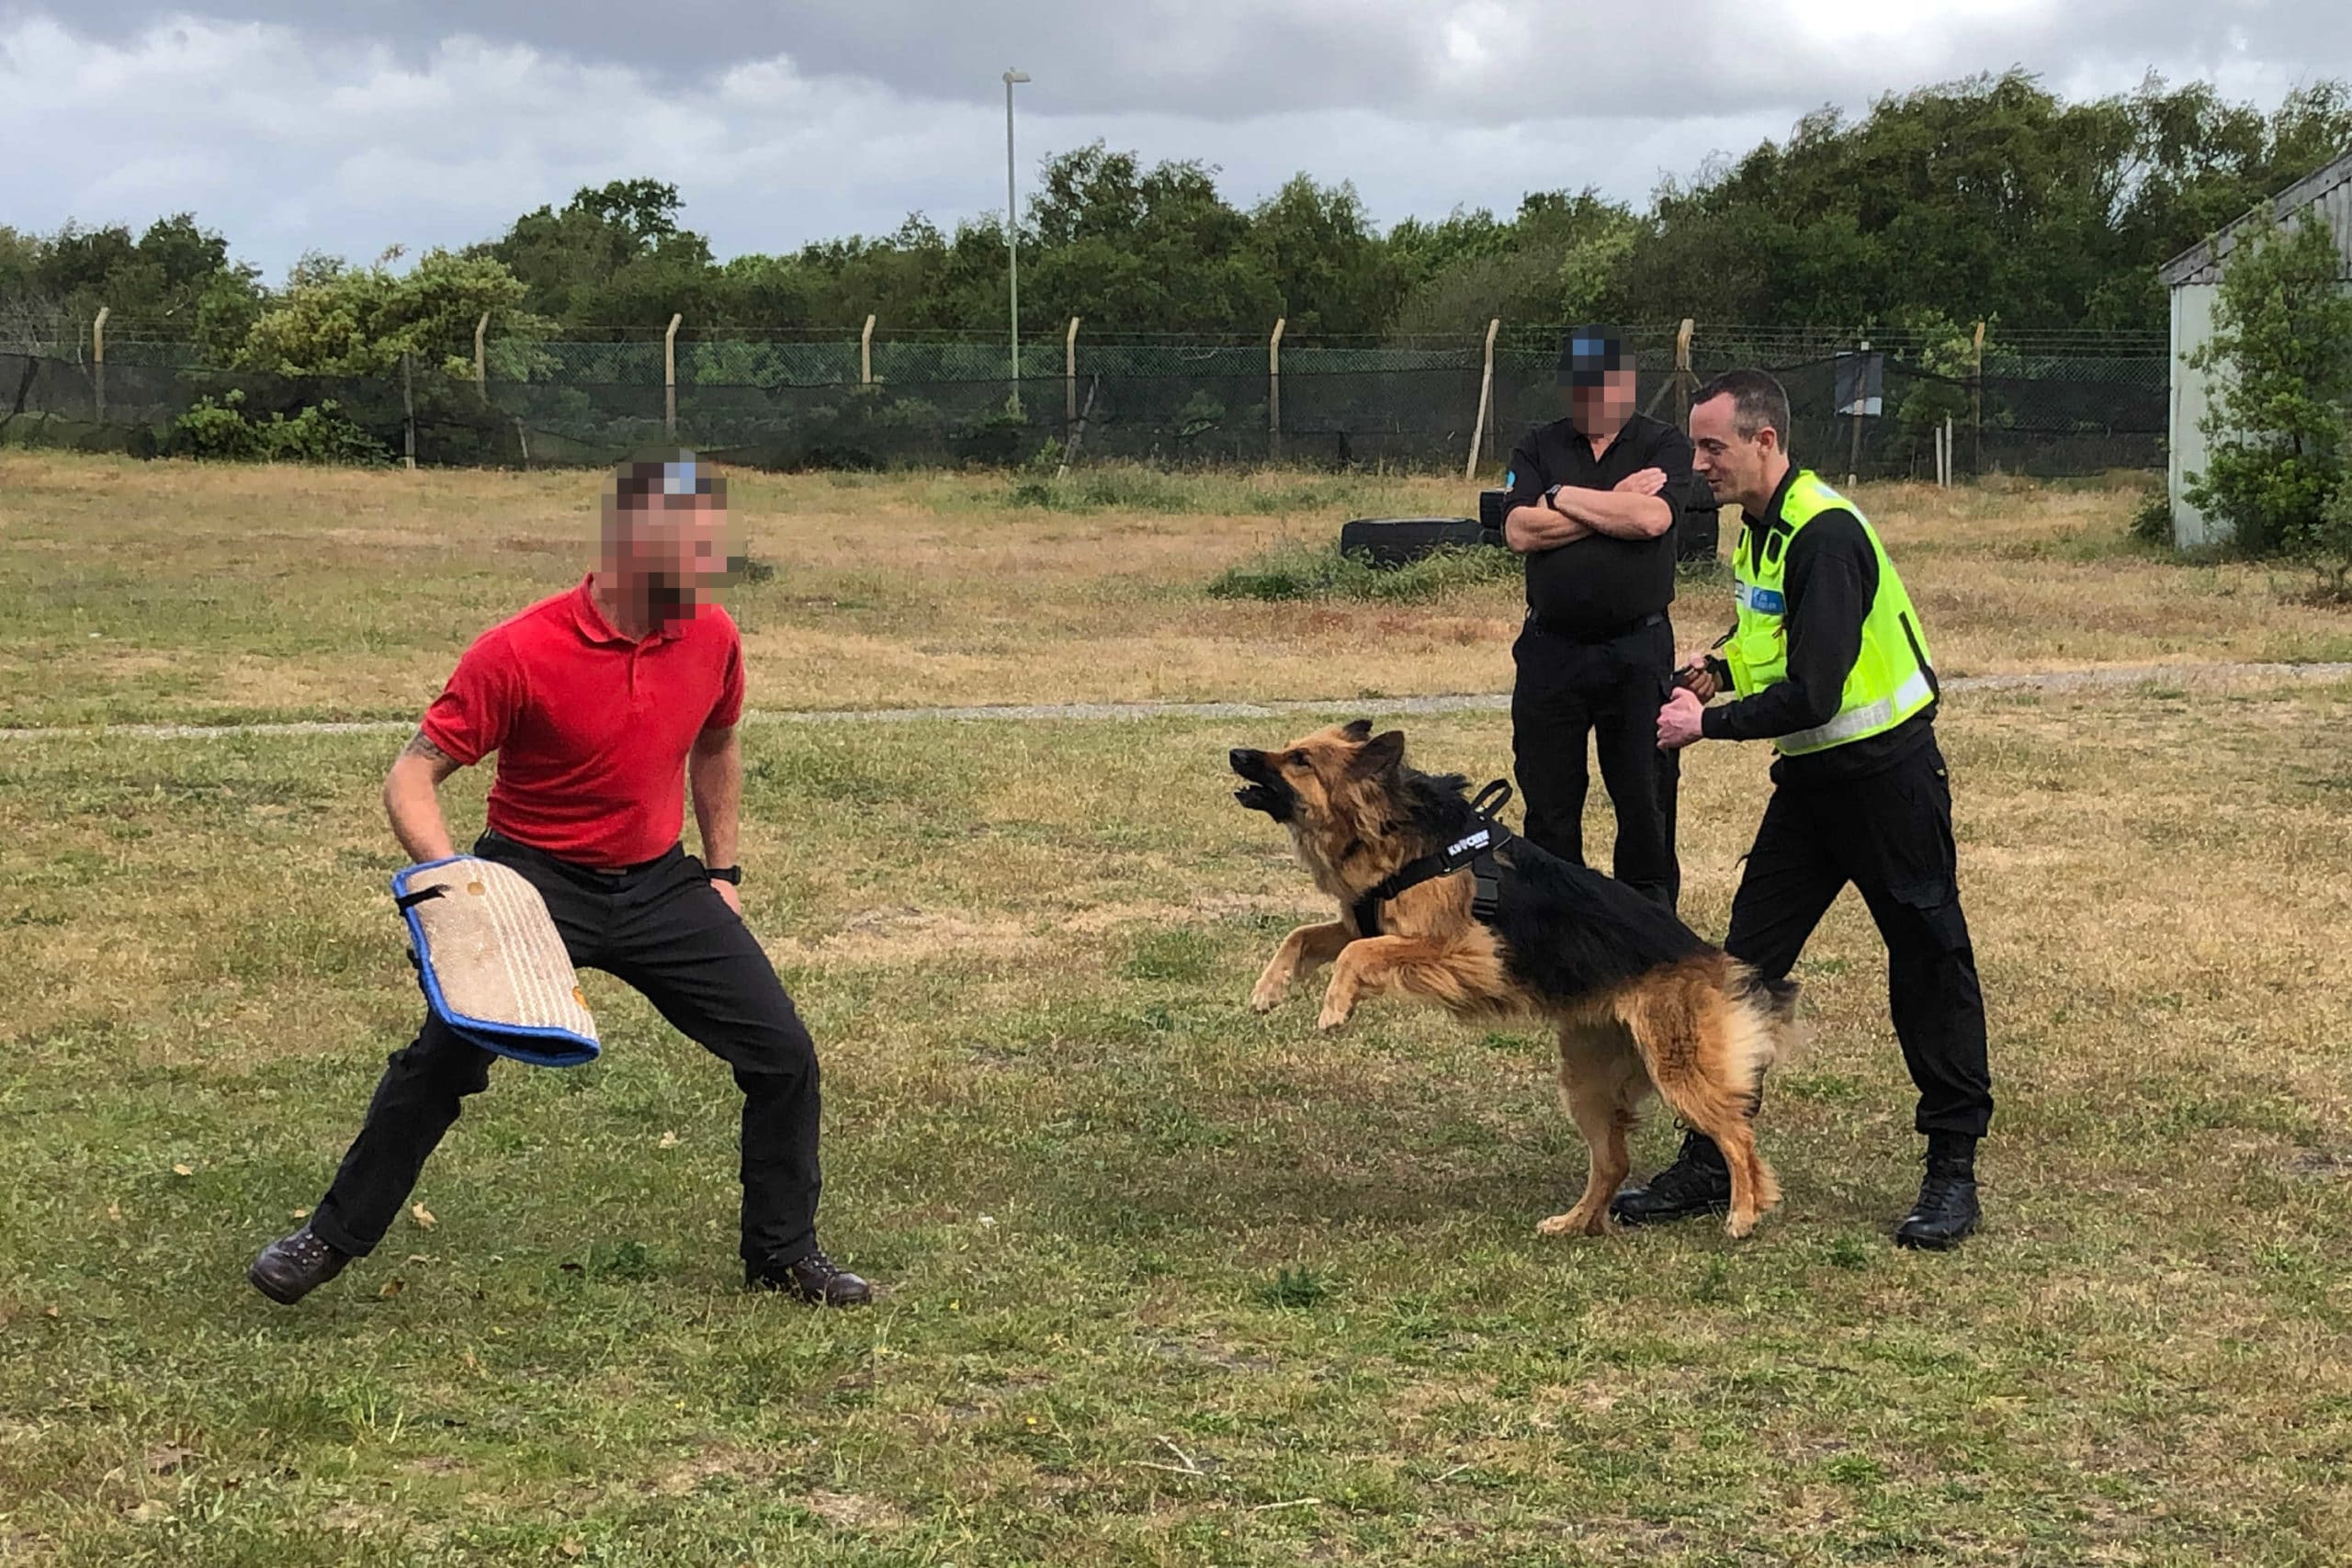 A Secure Site dog handler being trained and assessed at a NASDU training centr